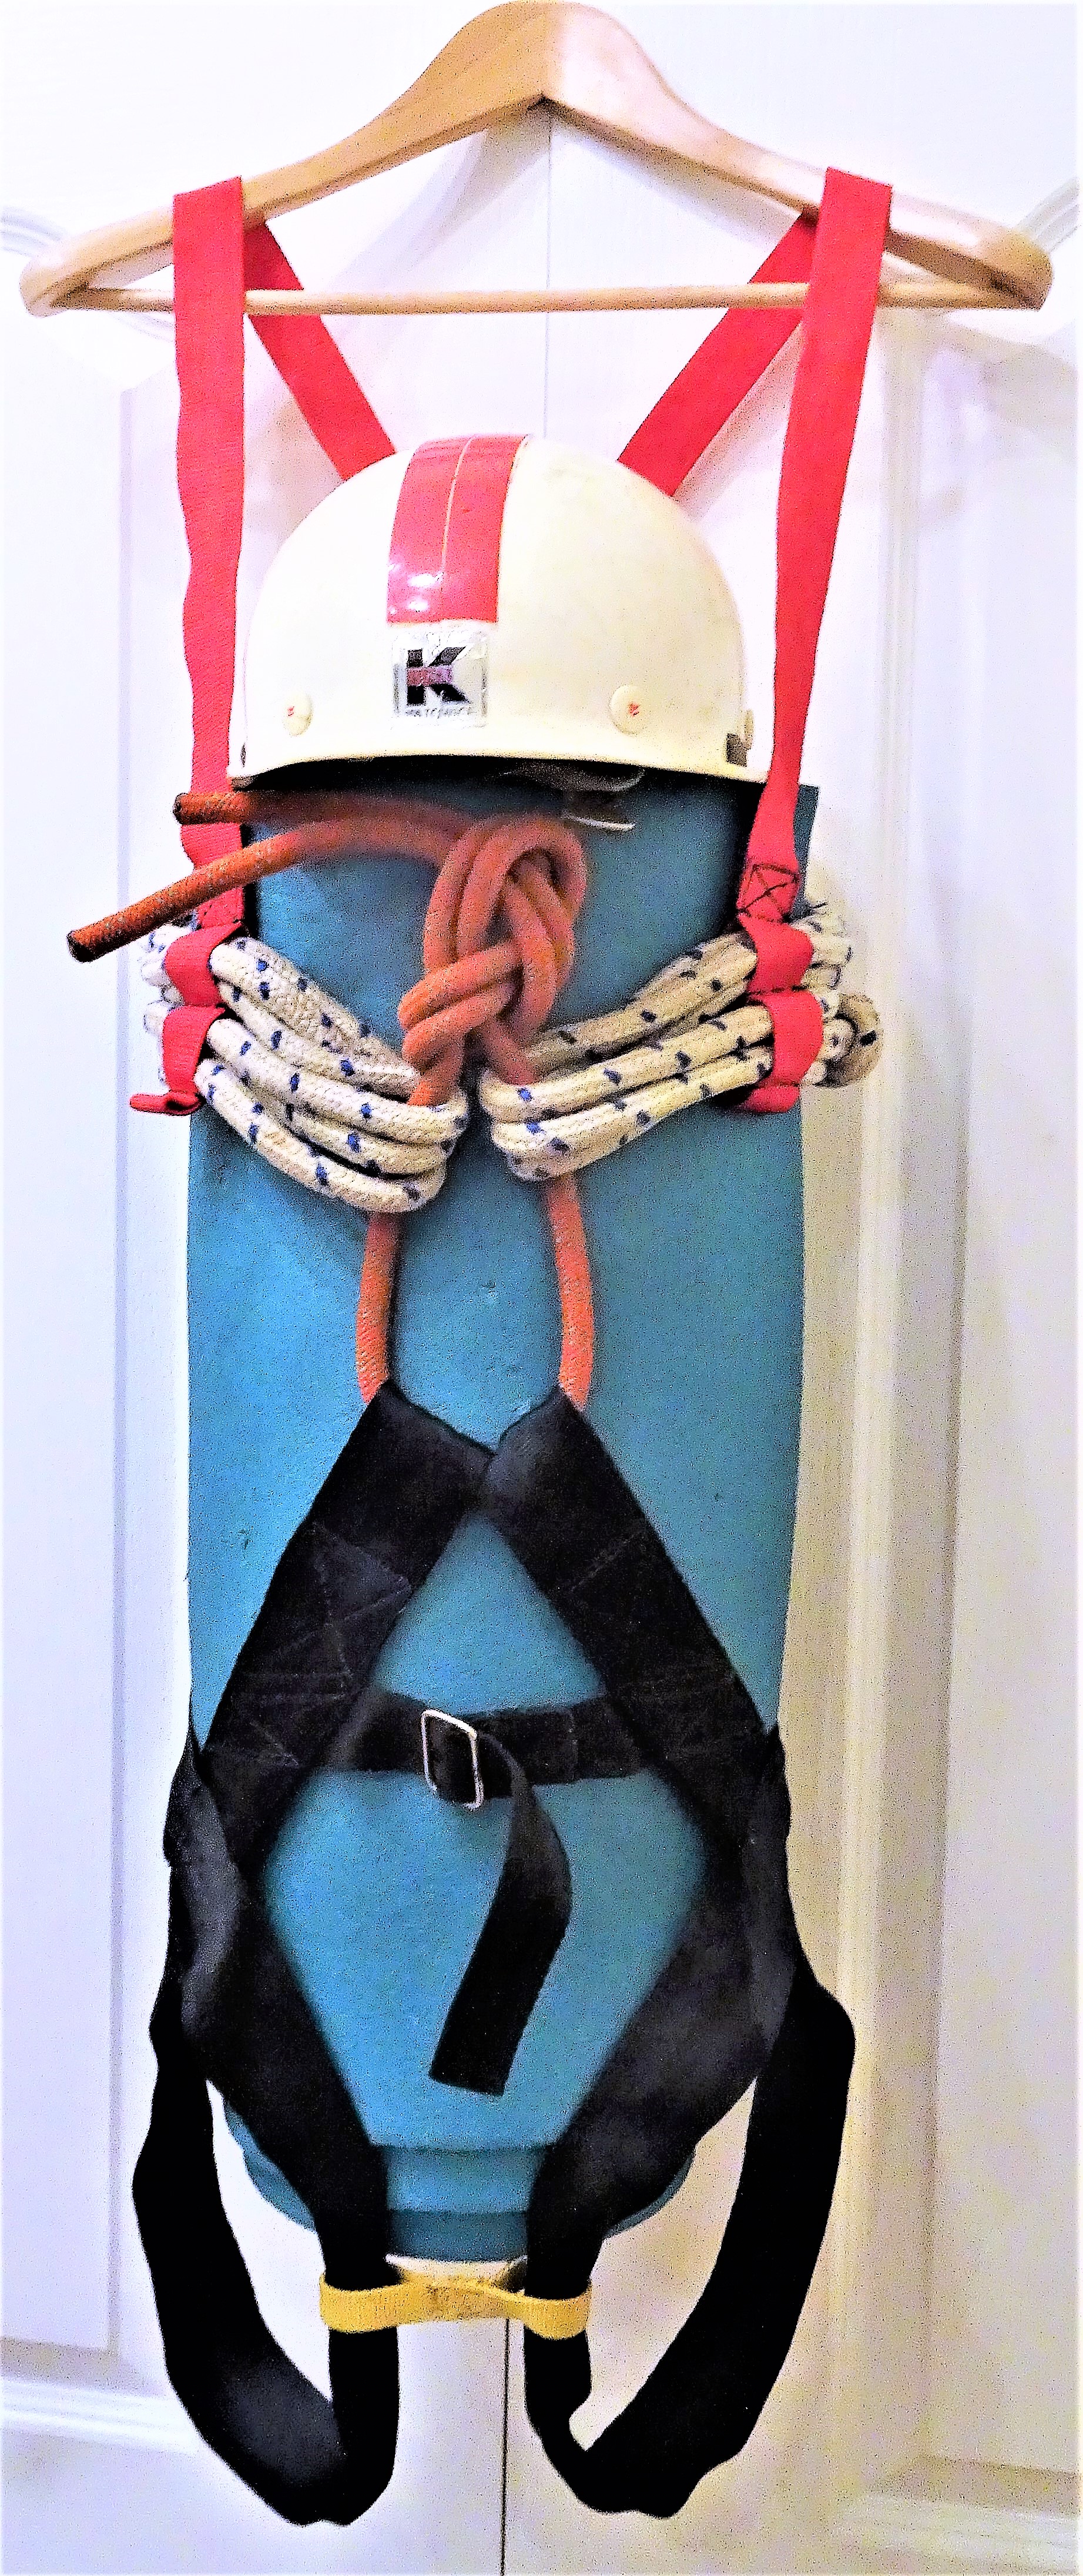 Climbing helmet and harness by Anonymous Mountaineer 